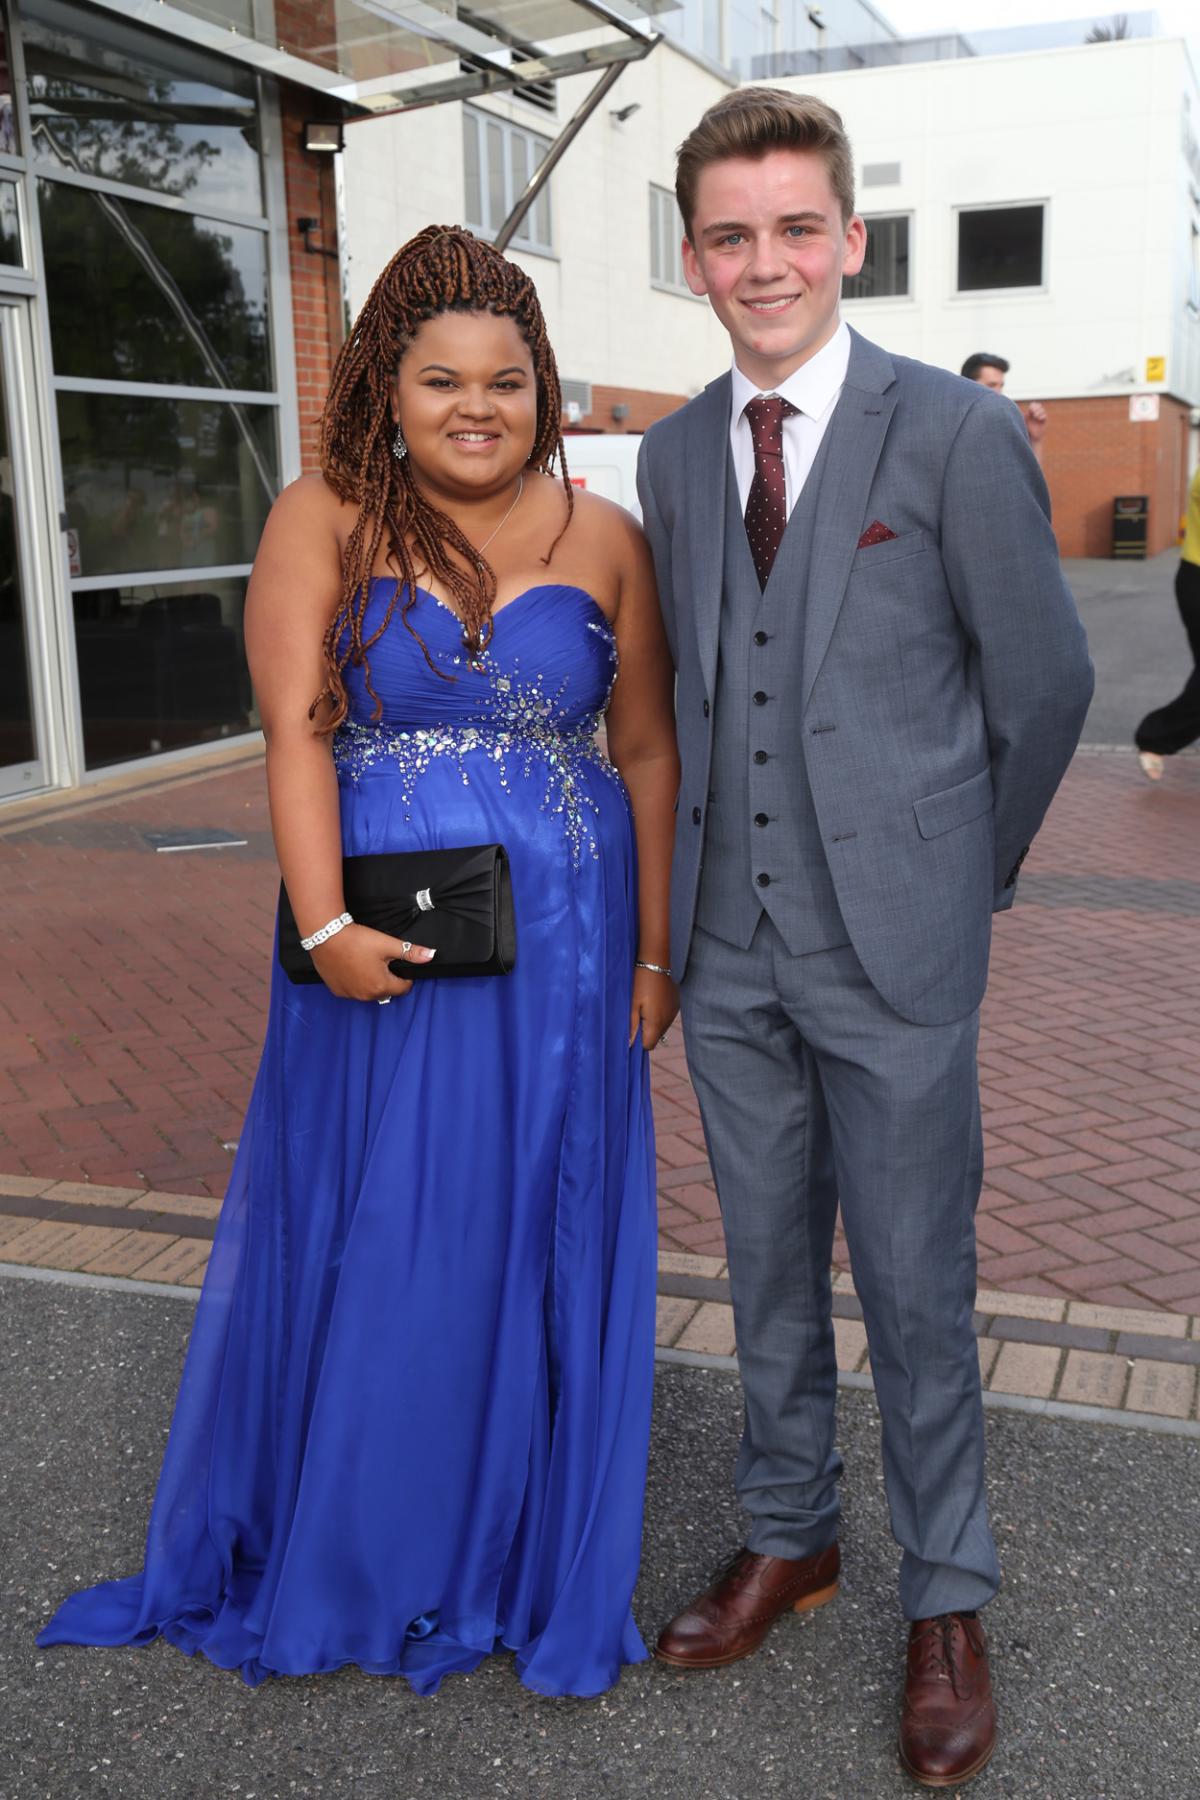 St Peter's School year 11 Prom at AFC Bournemouth on 2th June 2015. Pictures by Sam Sheldon. 